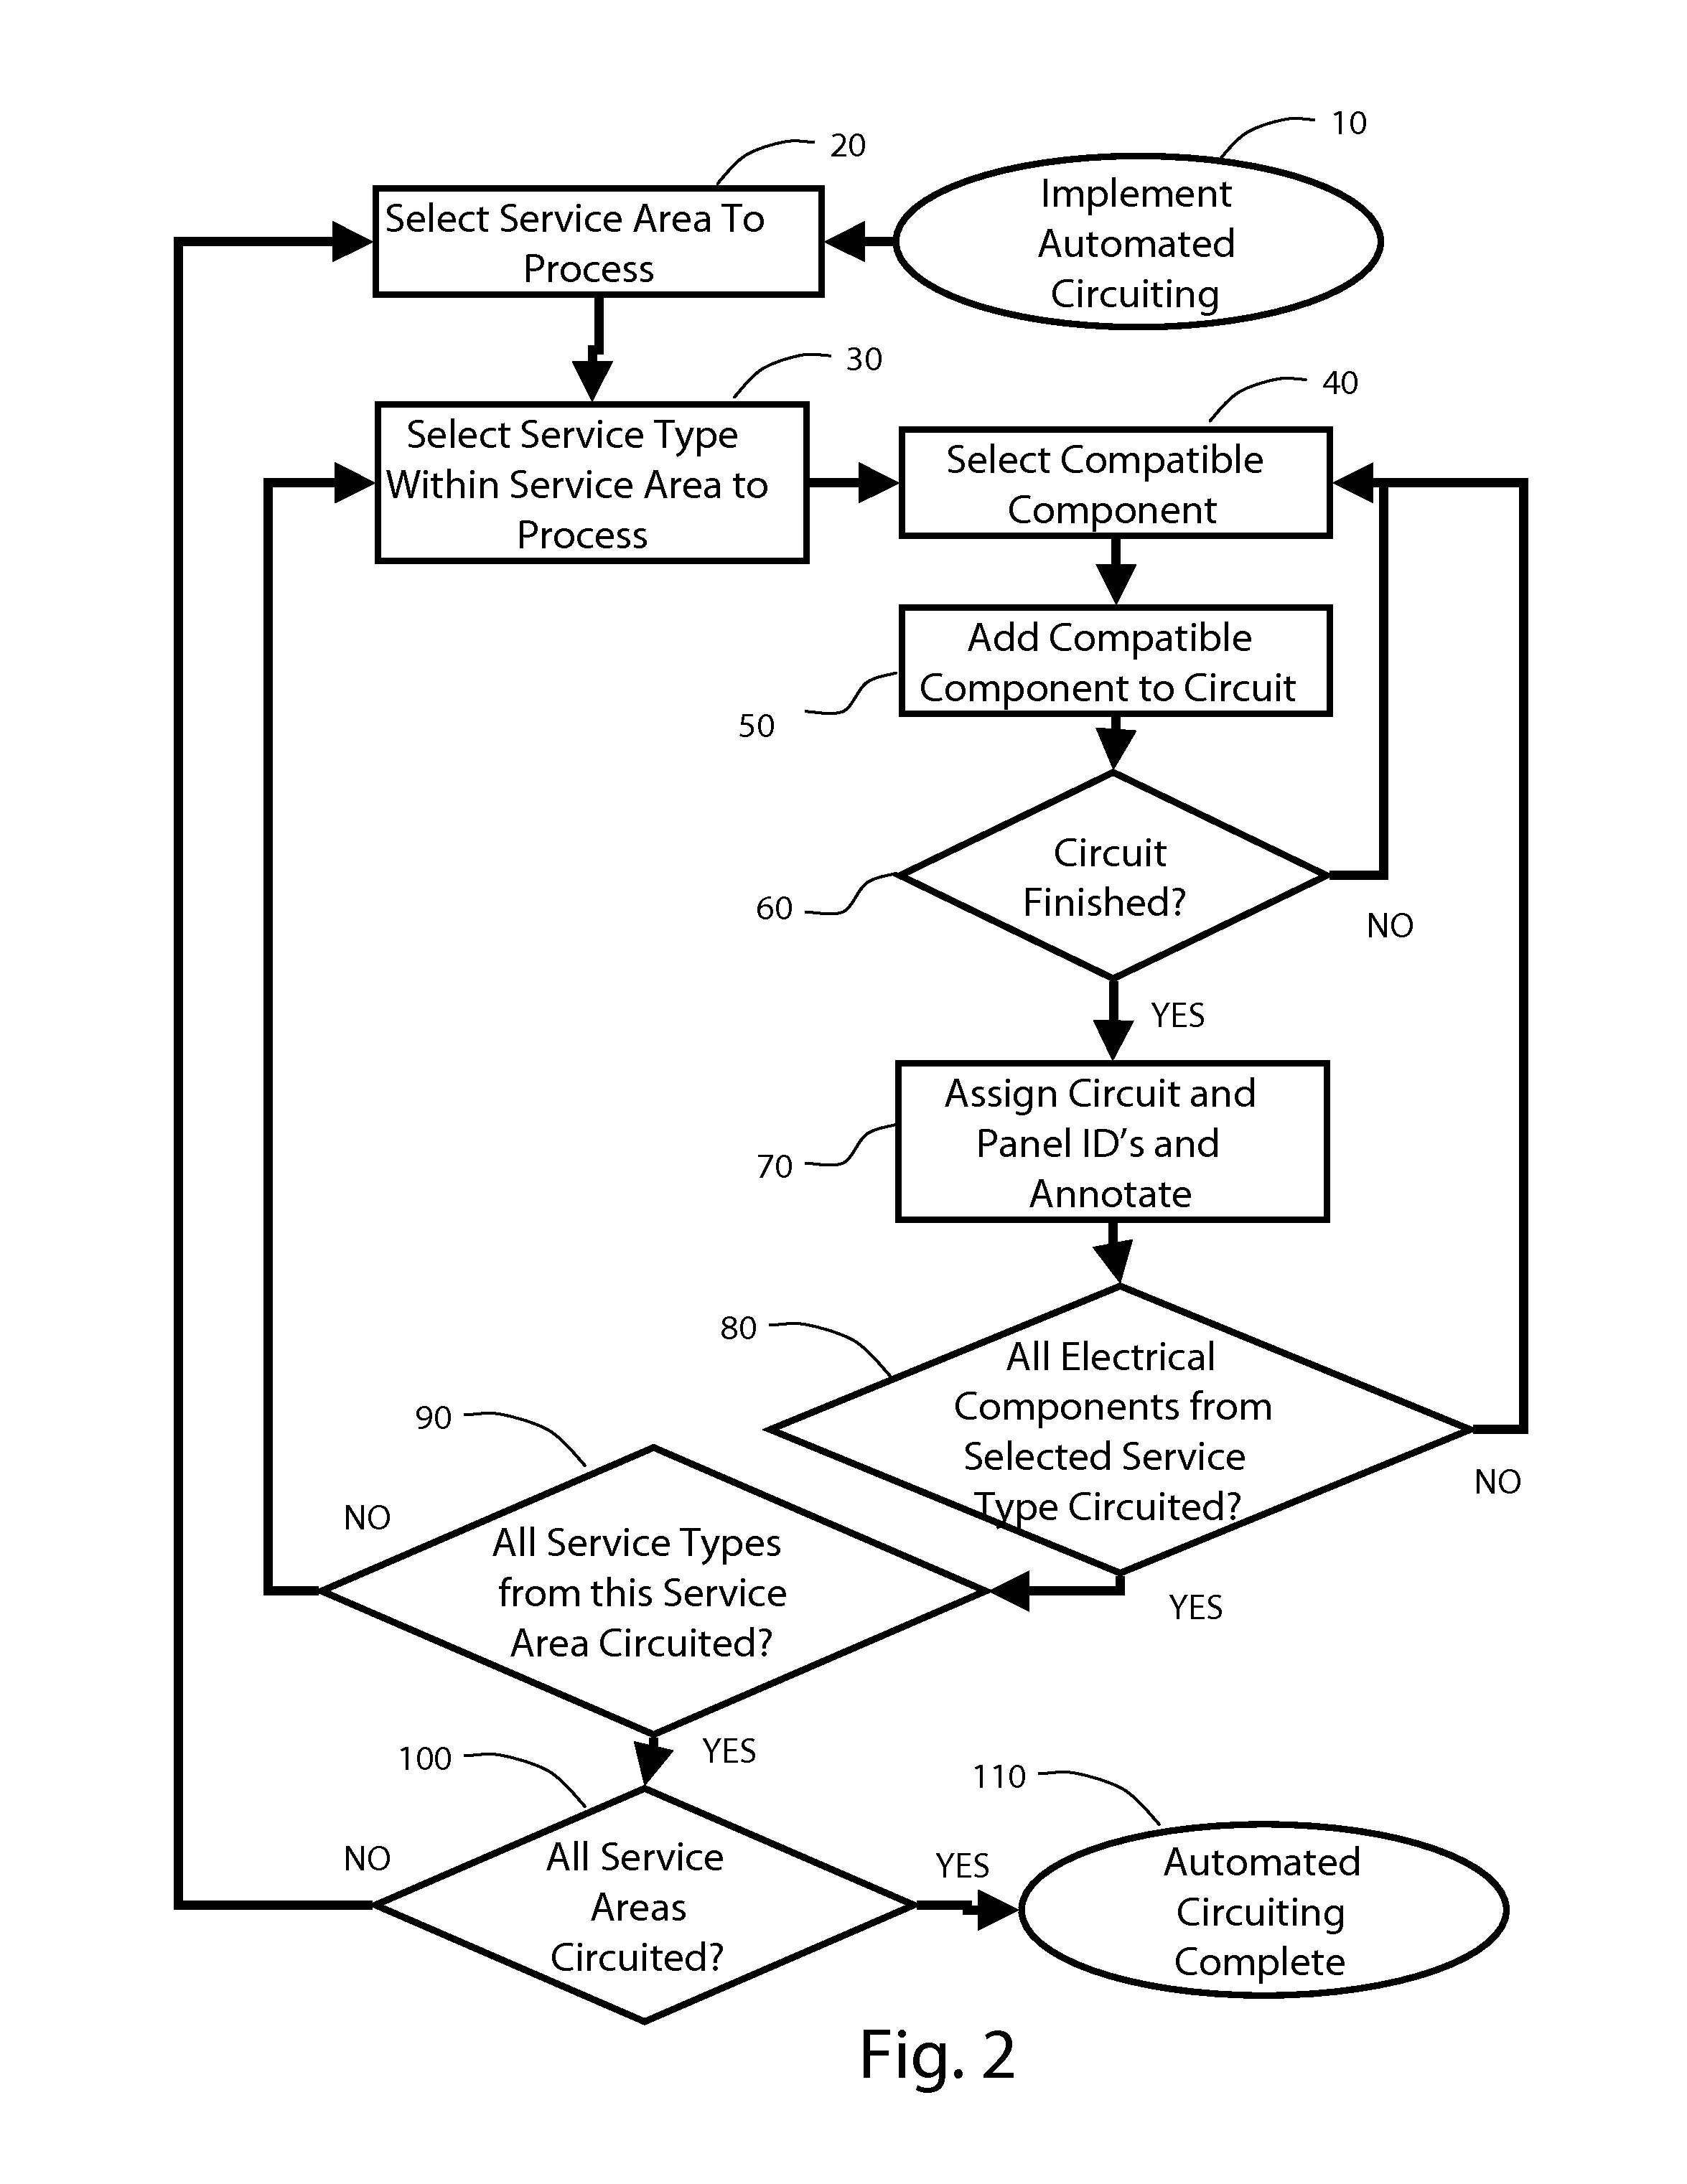 System and process for automated circuiting and branch circuit wiring